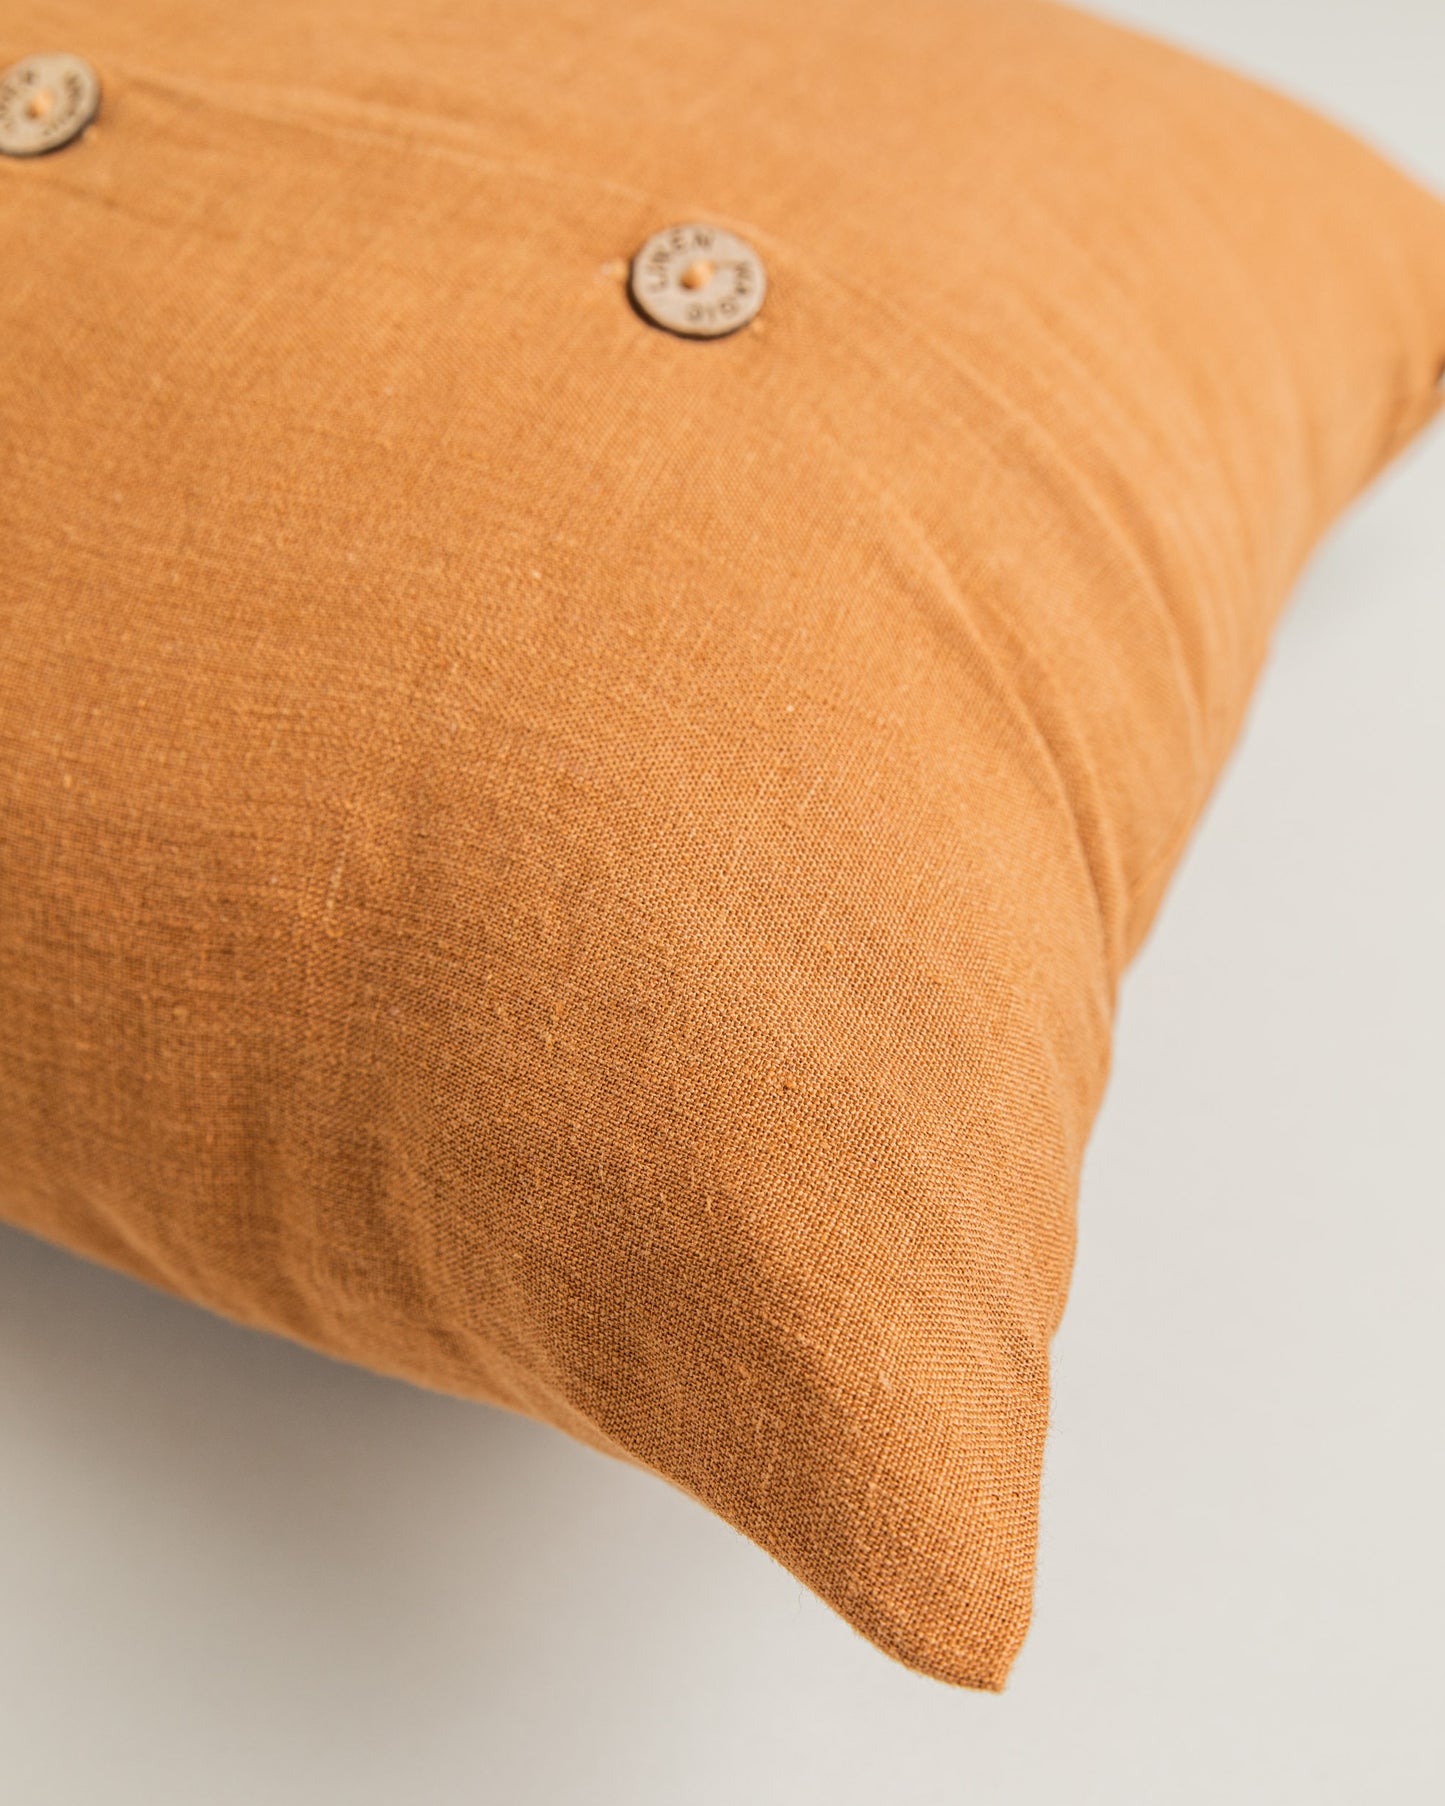 Deco pillow cover with buttons in Cinnamon - MagicLinen